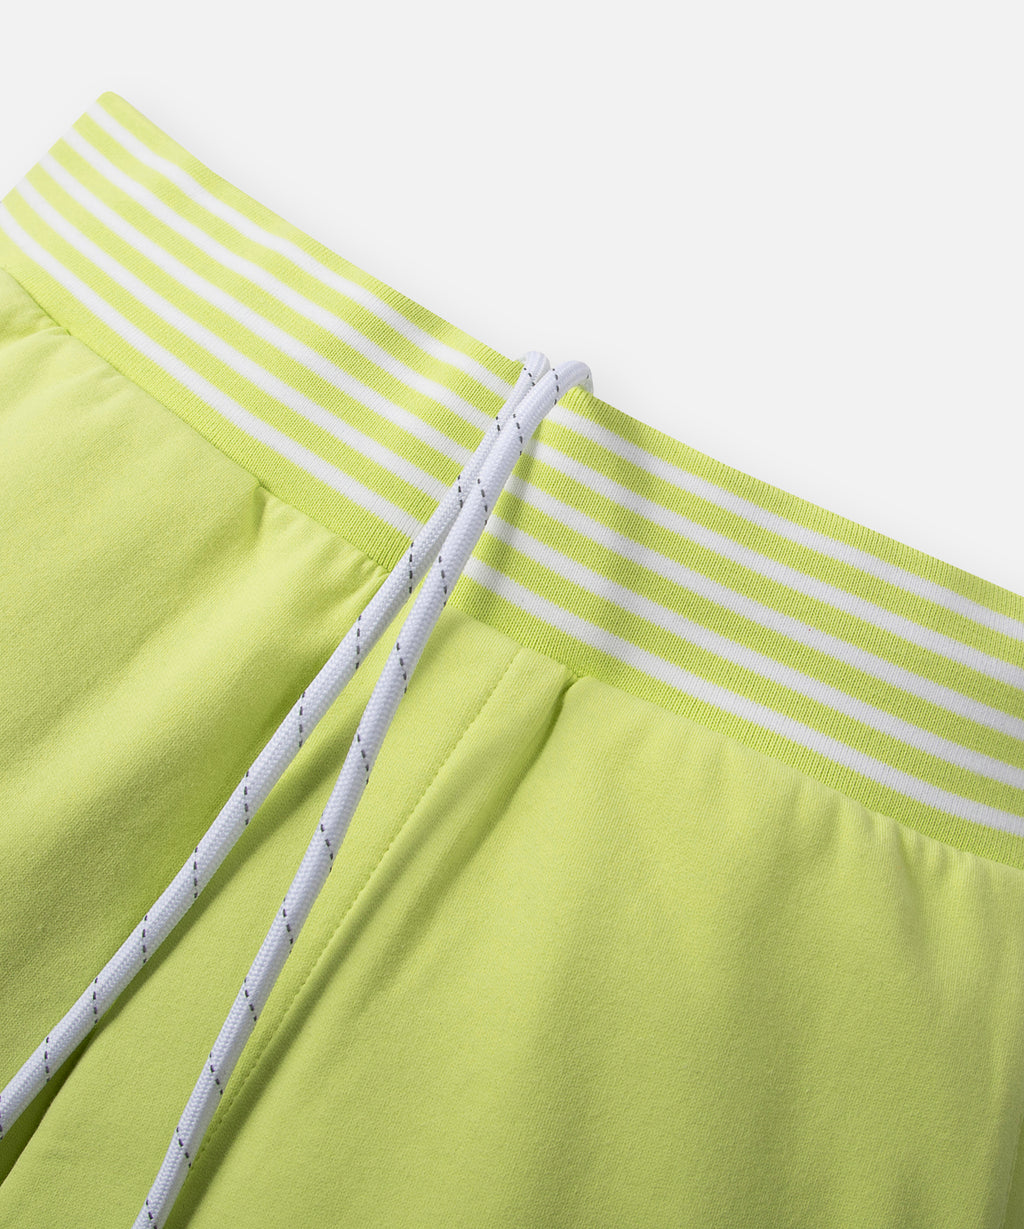  Striped rib waistband with drawcord on Paper Planes Gusset Short color Lime Sherbet.